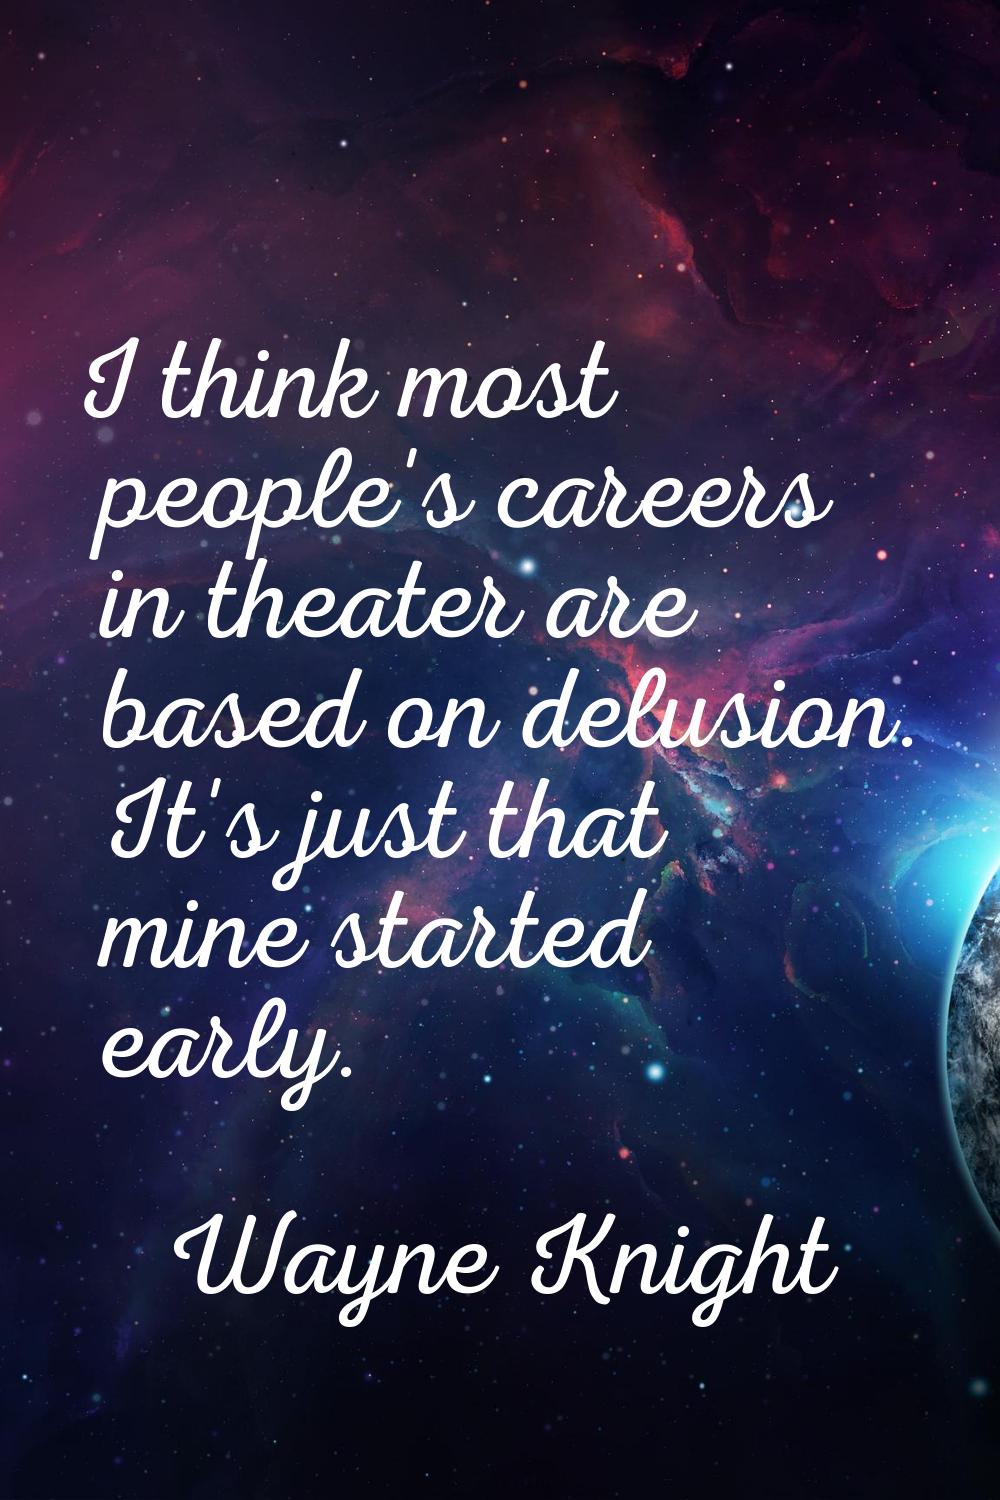 I think most people's careers in theater are based on delusion. It's just that mine started early.